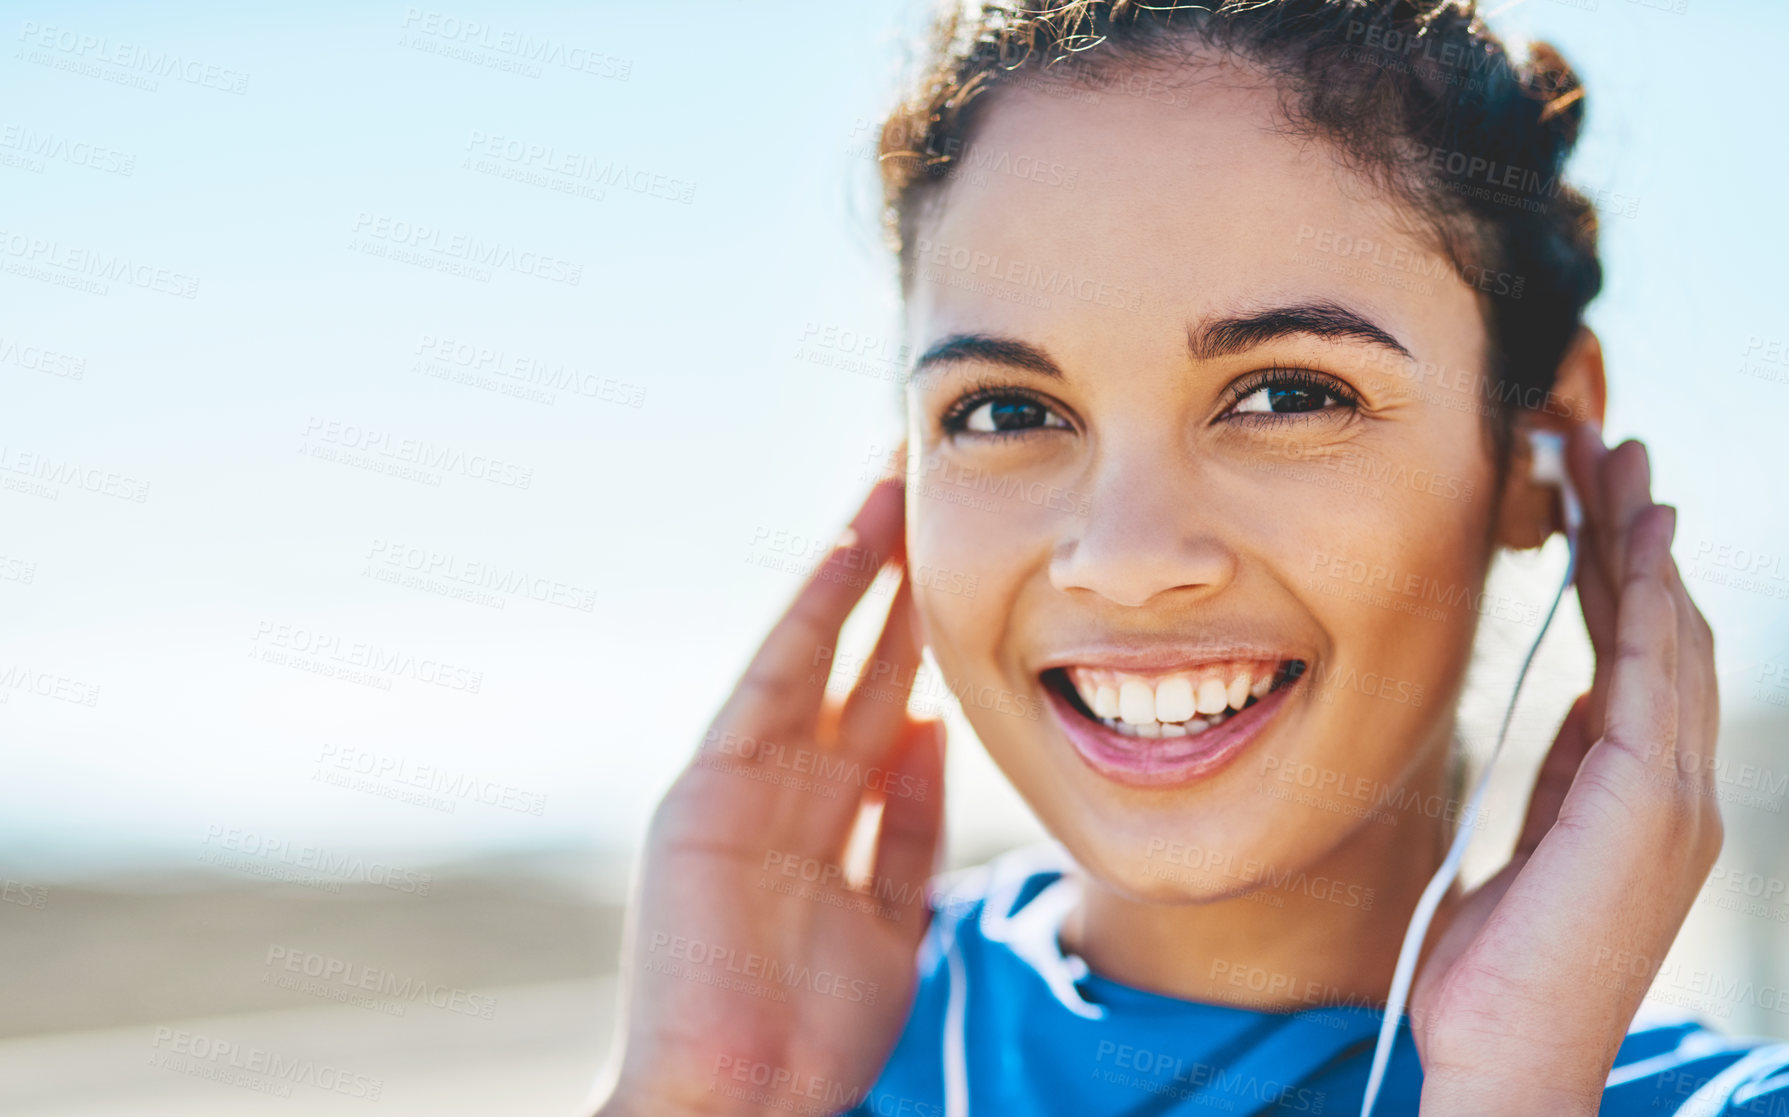 Buy stock photo Portrait of a sporty young woman listening to music while exercising outdoors